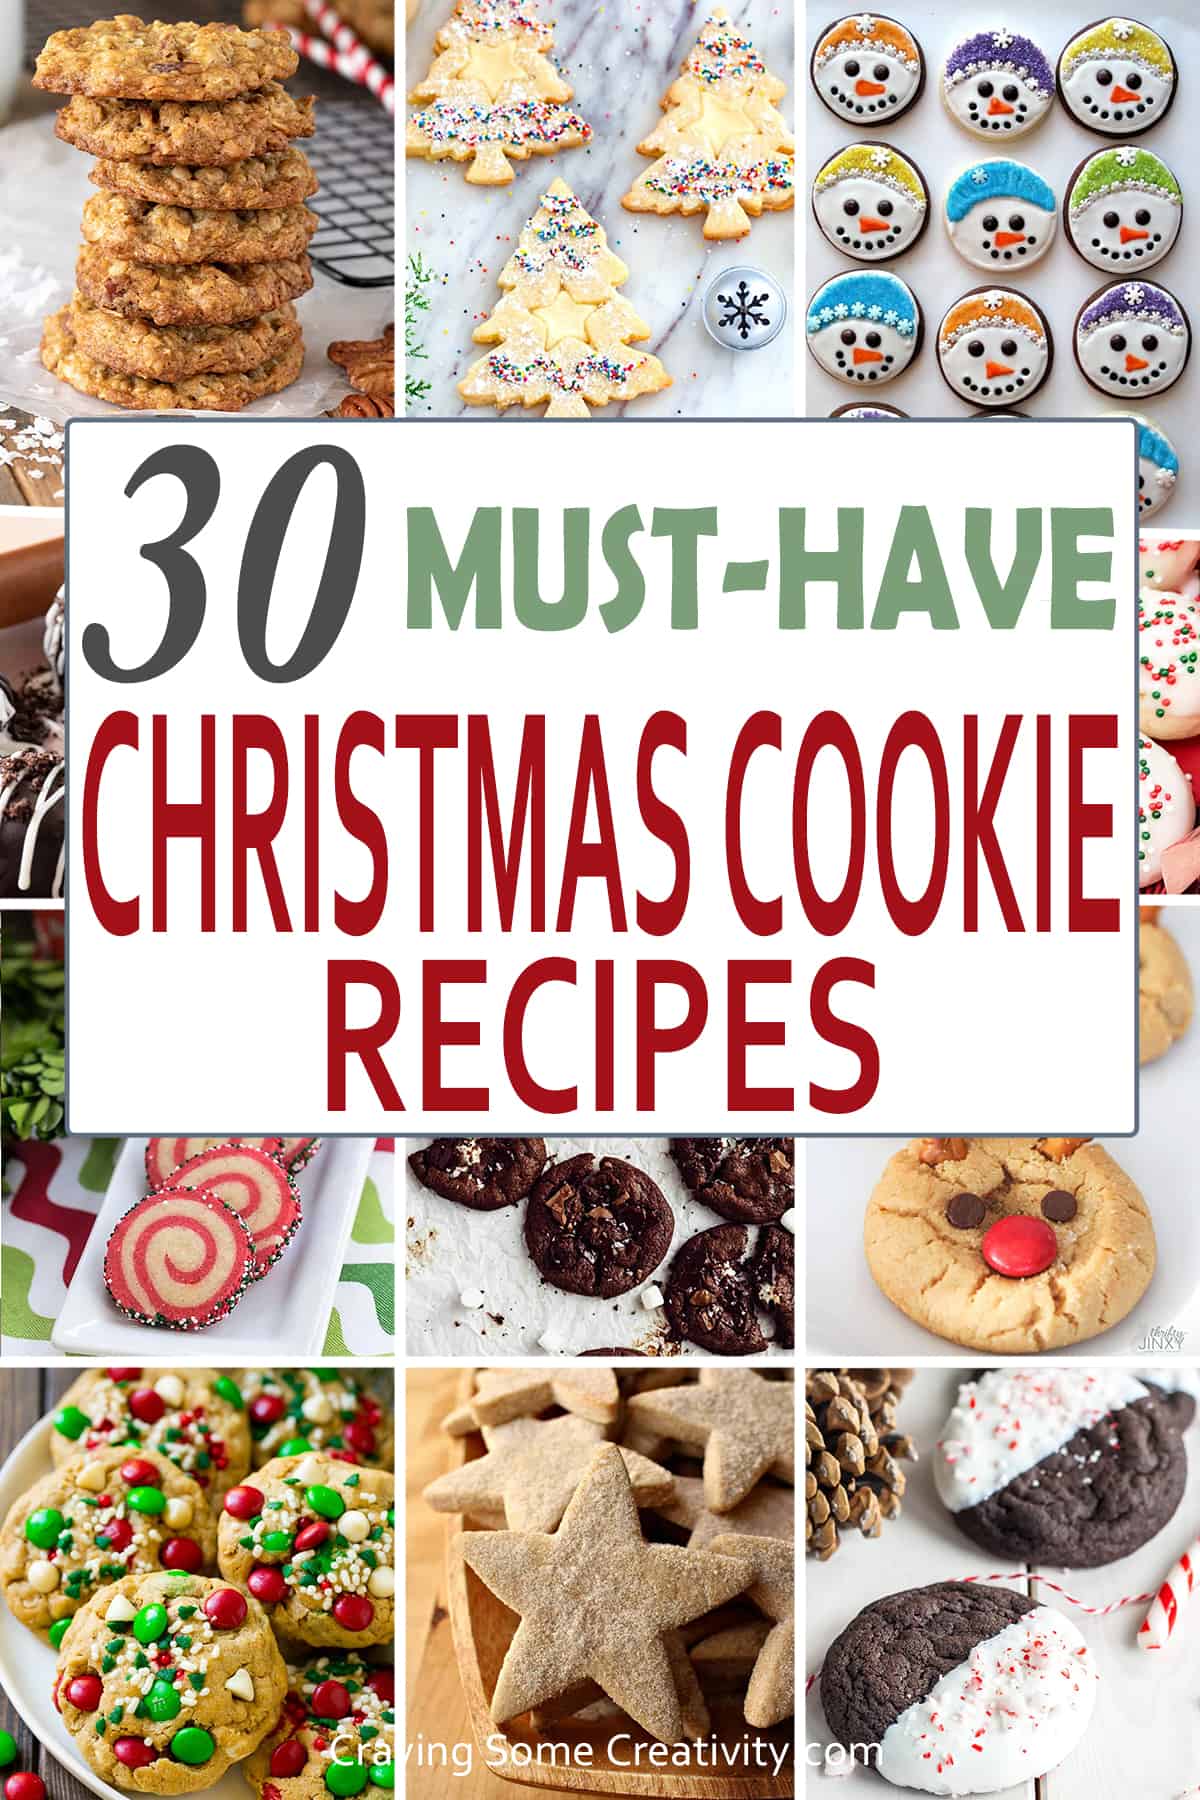 Collage of Christmas cookie recipes for an exchange including chocolate chip, iced cookies, and holiday shapes. Post title overlay.